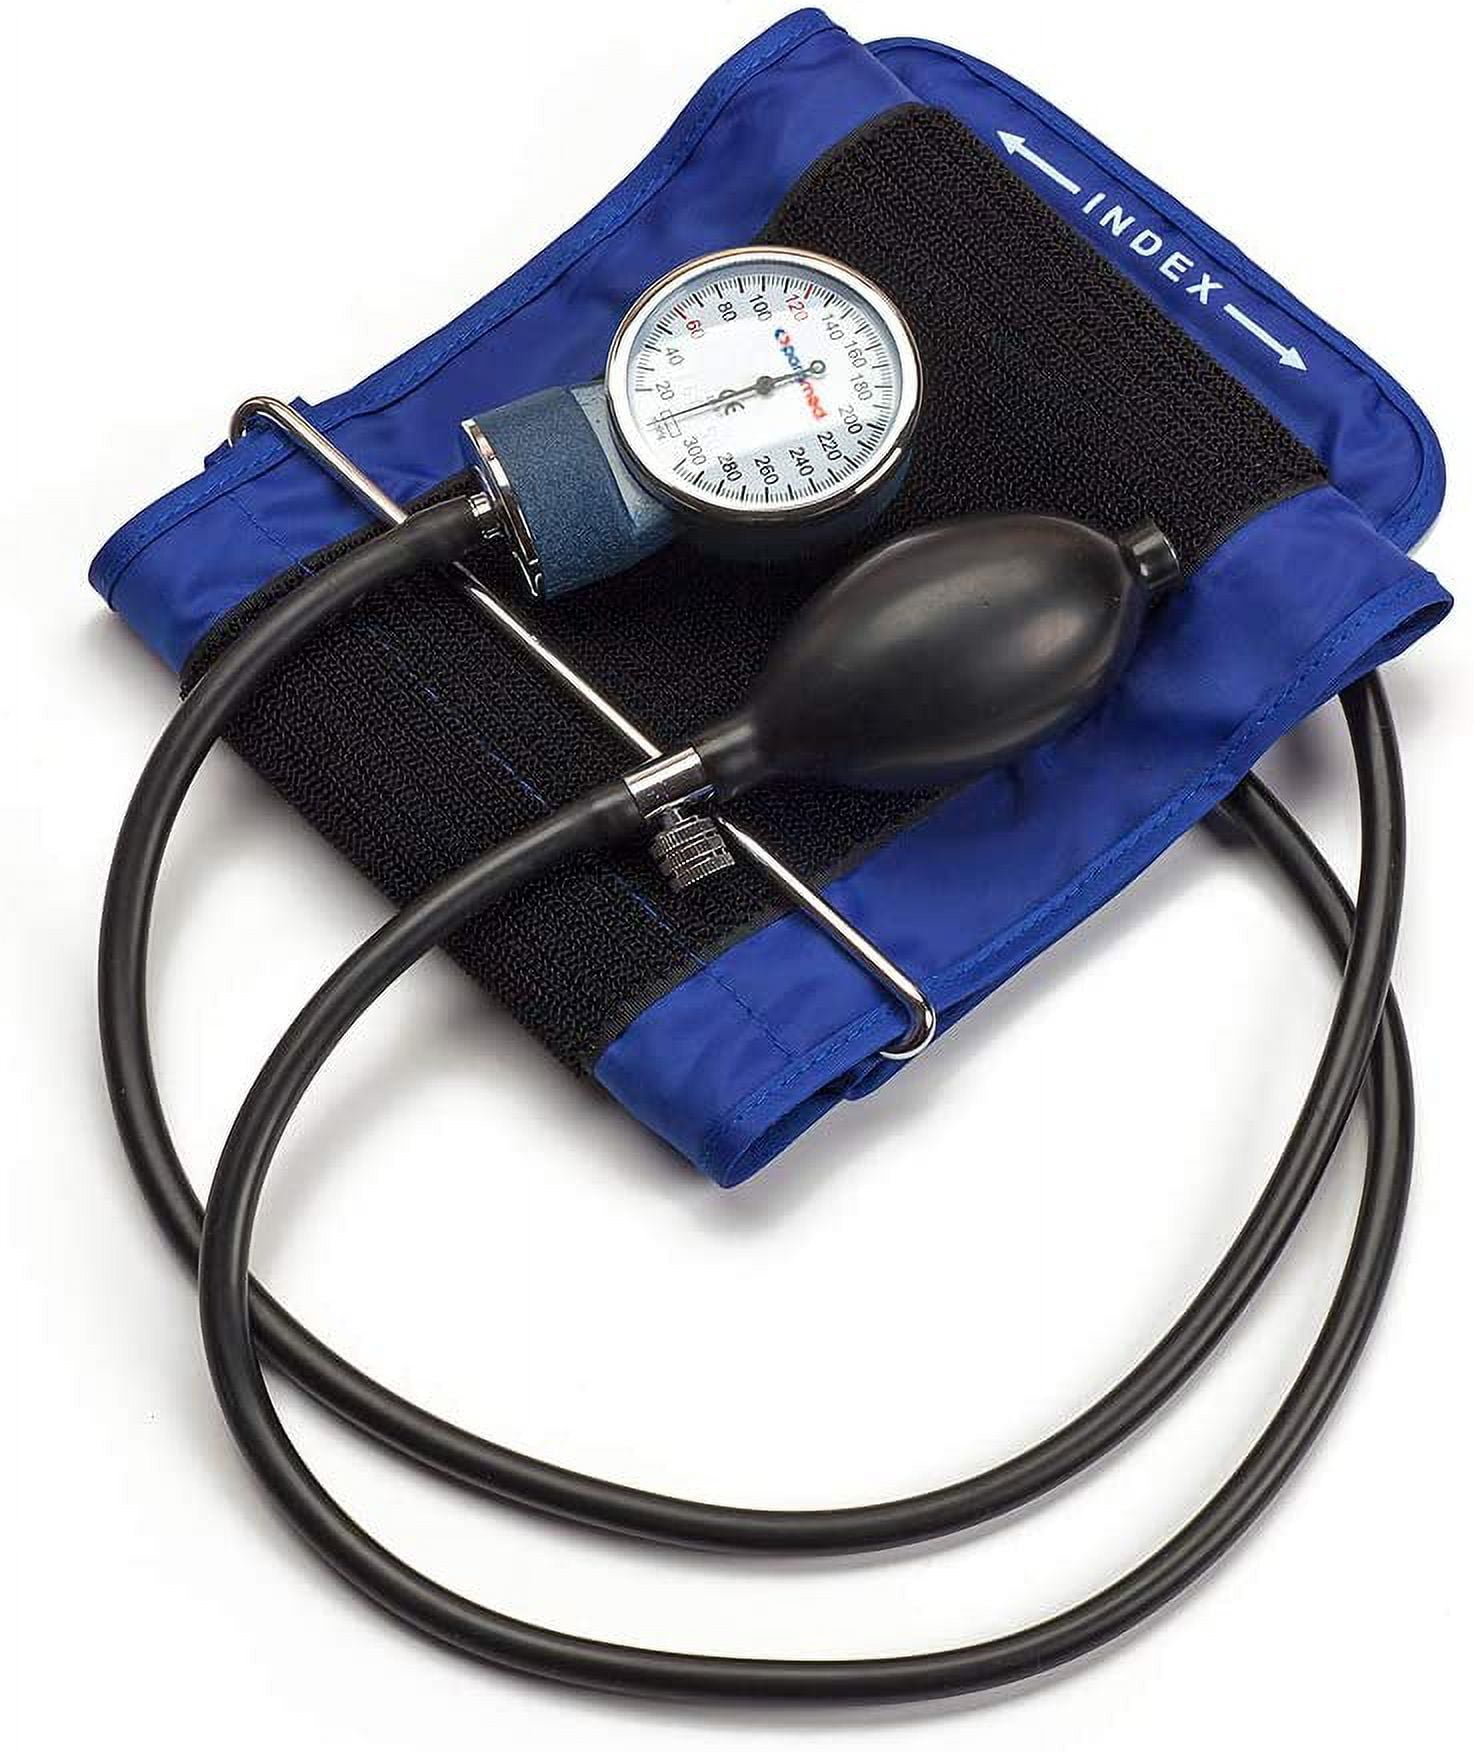 PARAMED Aneroid Sphygmomanometer with Stethoscope – Manual Blood Pressure  Cuff with Universal Cuff 8.7-16.5 and D-Ring – Carrying Case in The kit –